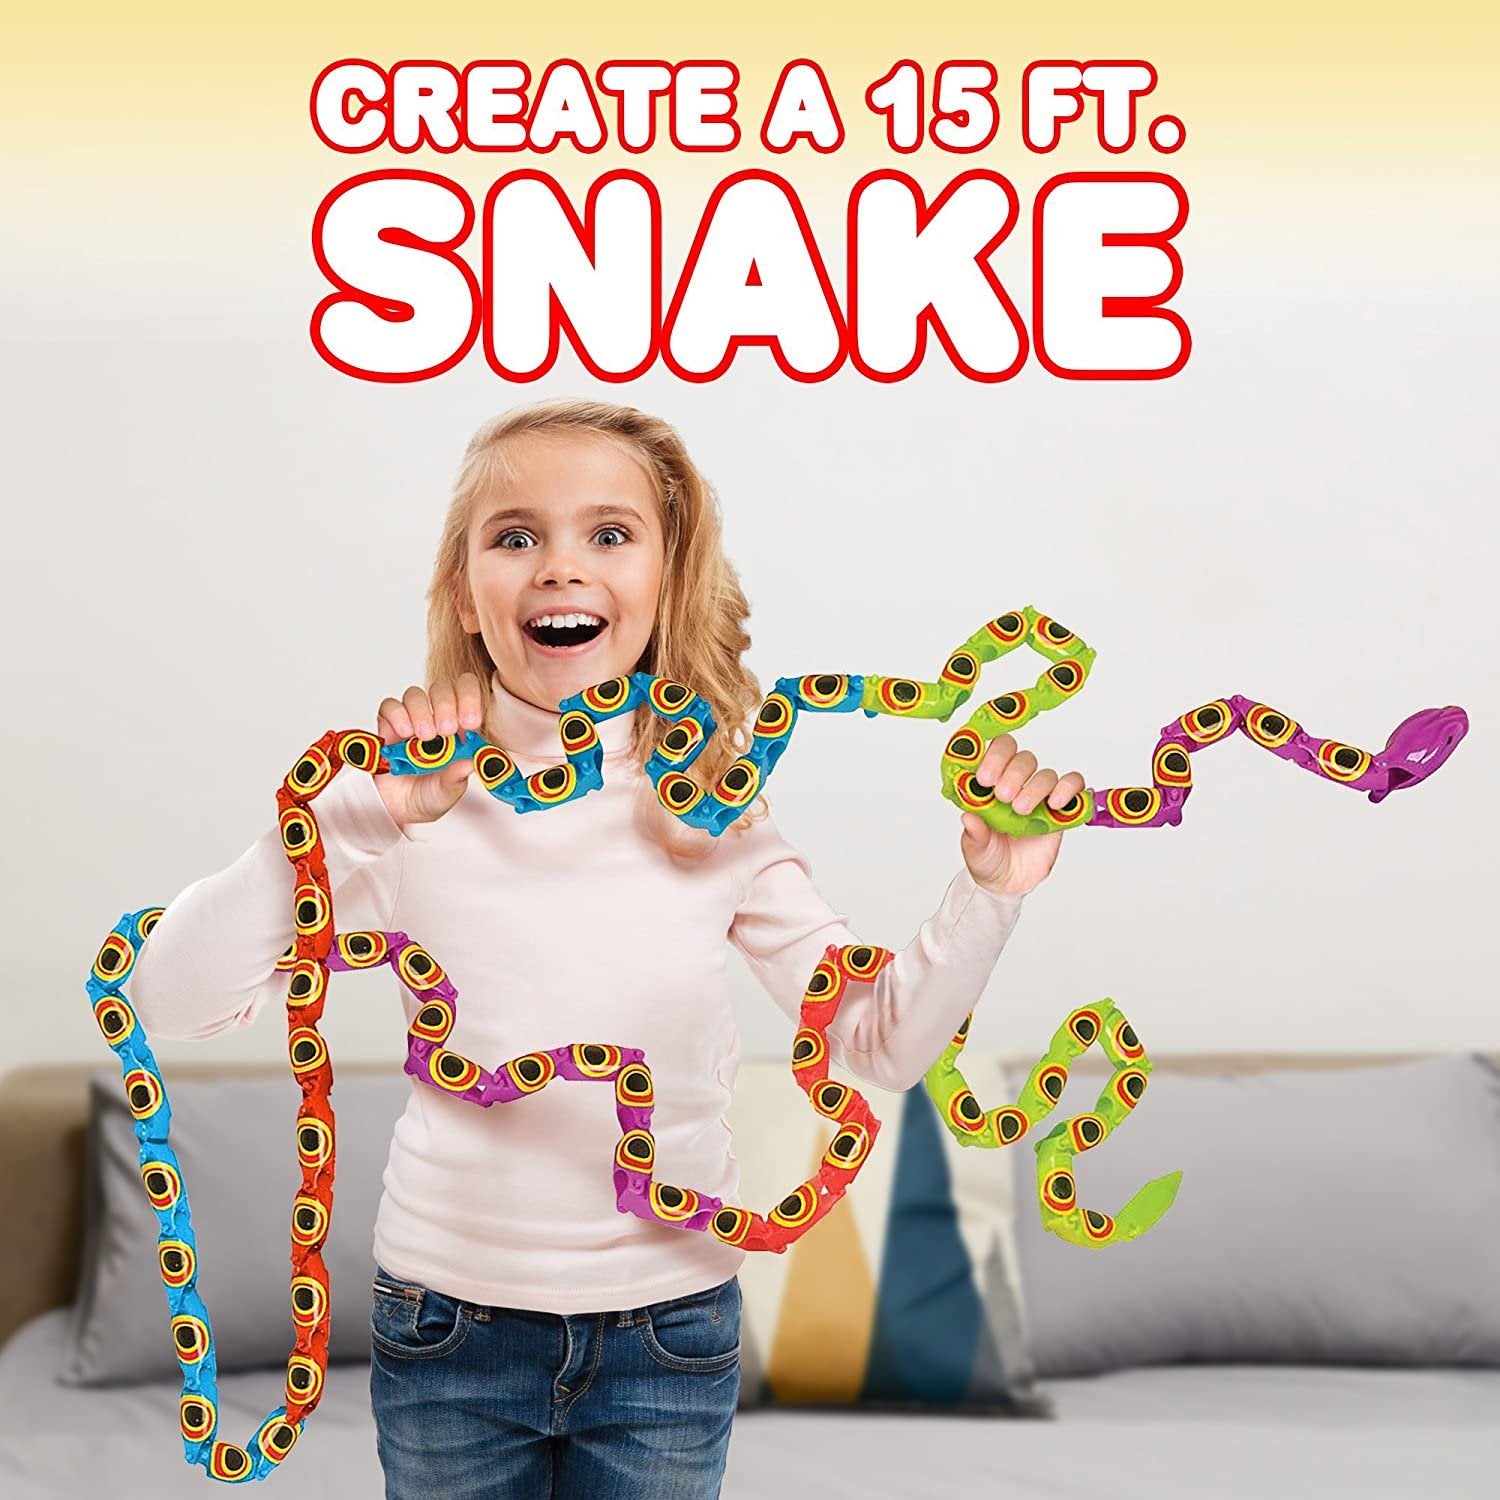 Jointed Snake Toys Set of 12 - 15" Long Plastic Snakes with Joining Pieces - Great Party Favor - Fidget Toy for Kids, Gift Idea for Boys and Girls, Carnival Prize - Sensory Toy